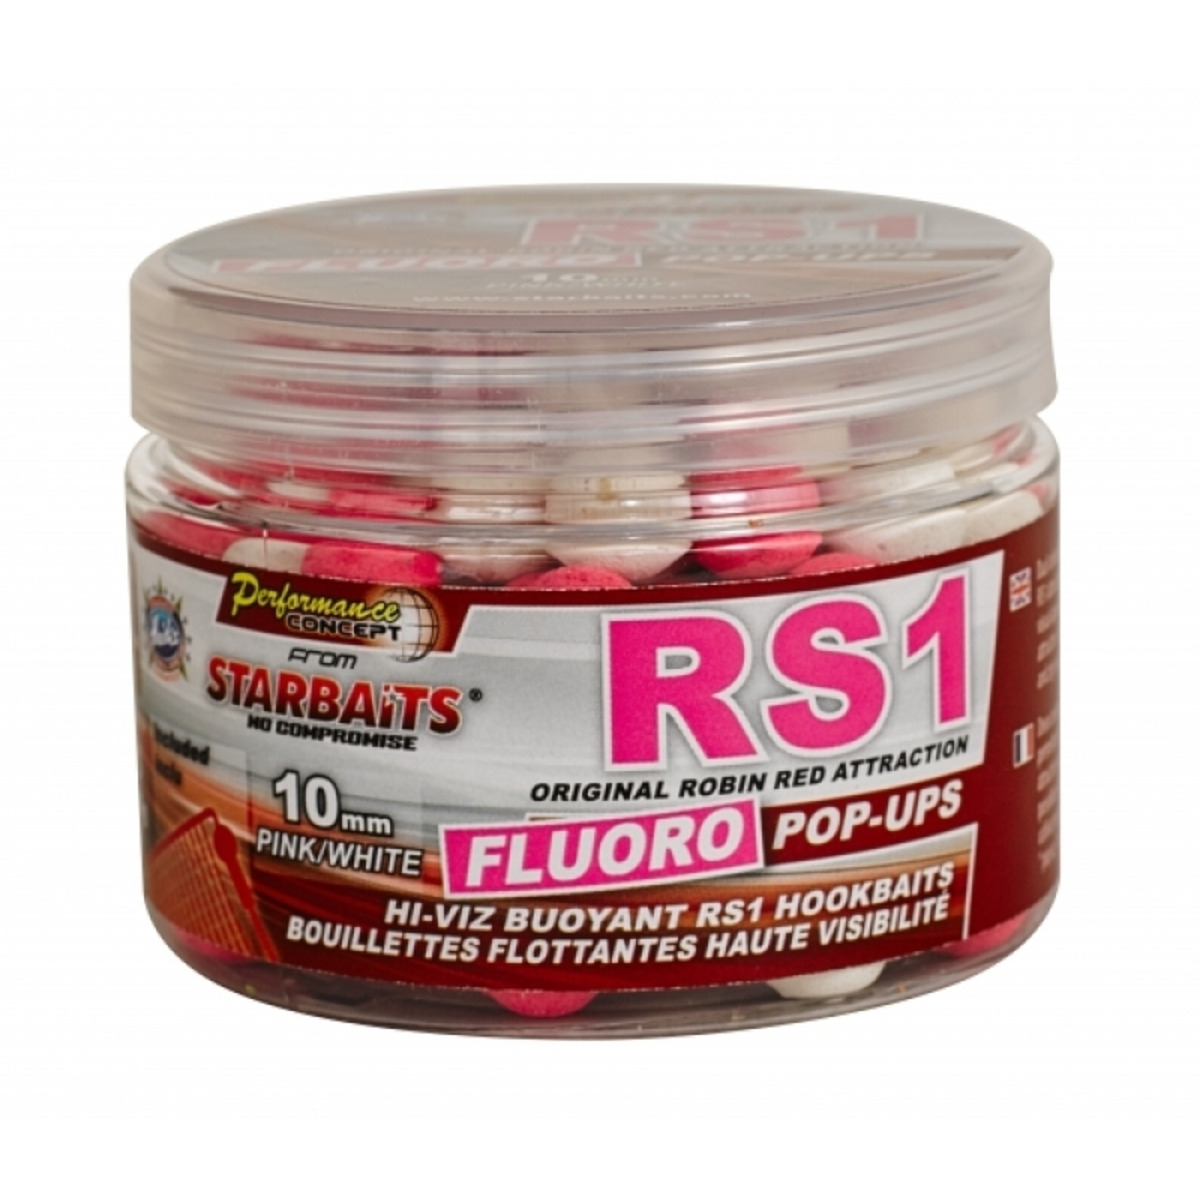 Starbaits Concept Fluo Pop Ups Rs1 - 10 mm  - 60 g